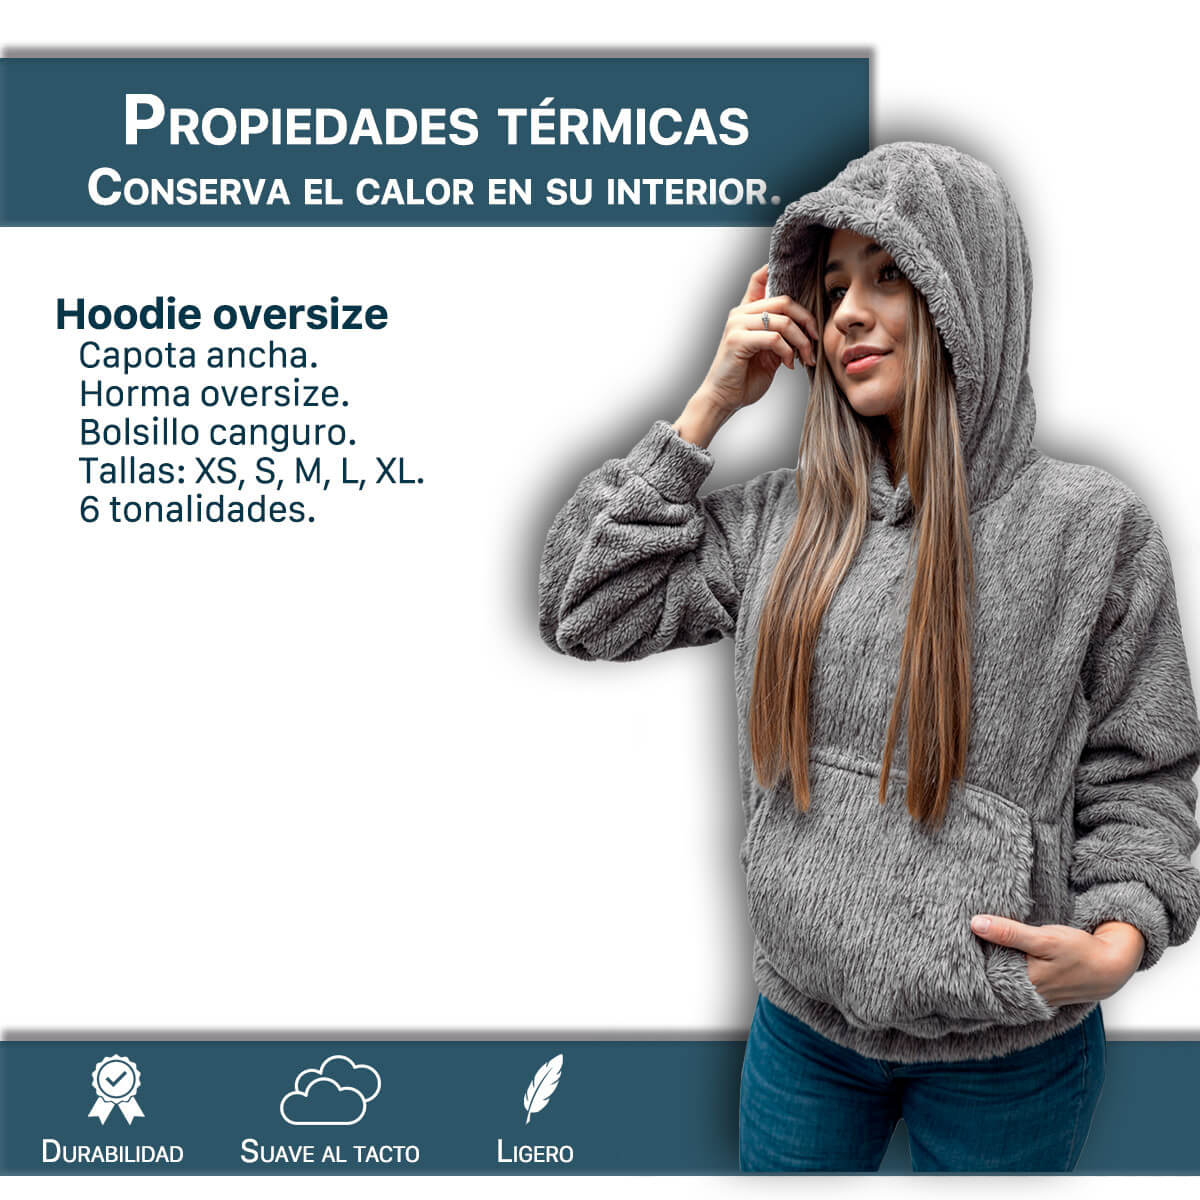 Hoodie Clásico Grizzly Mujer